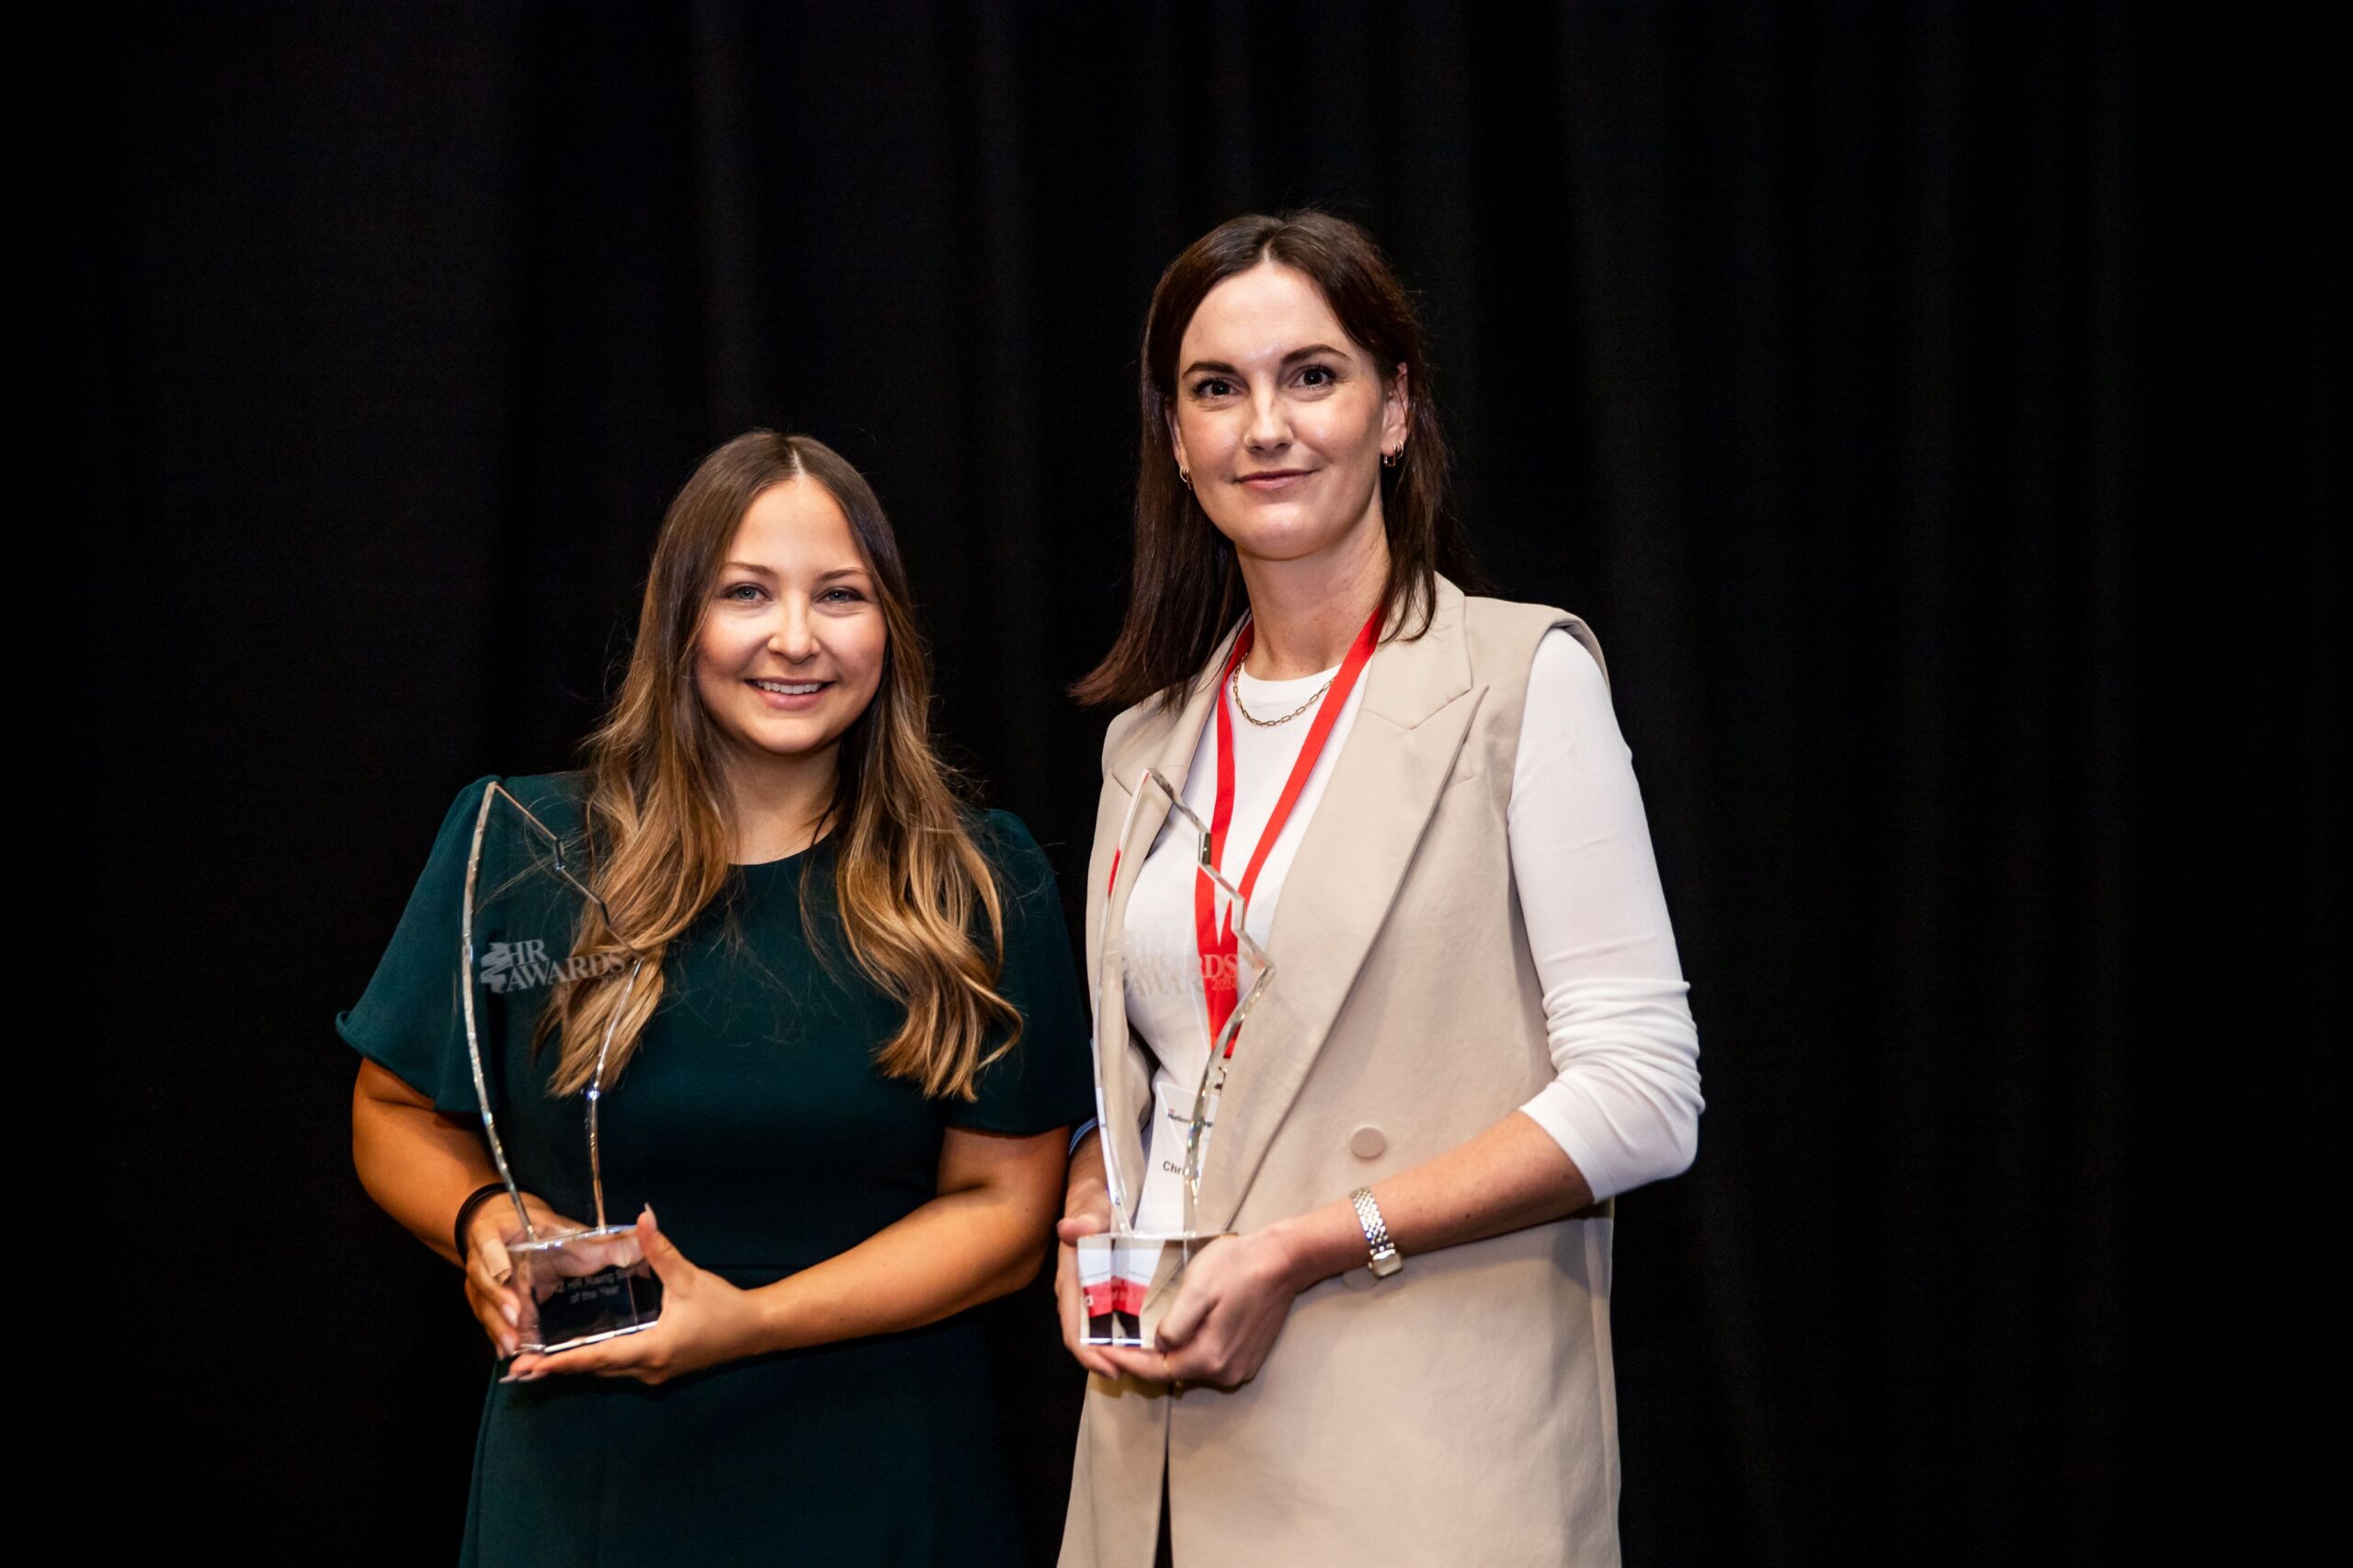 NZ HR RISING STAR OF THE YEAR